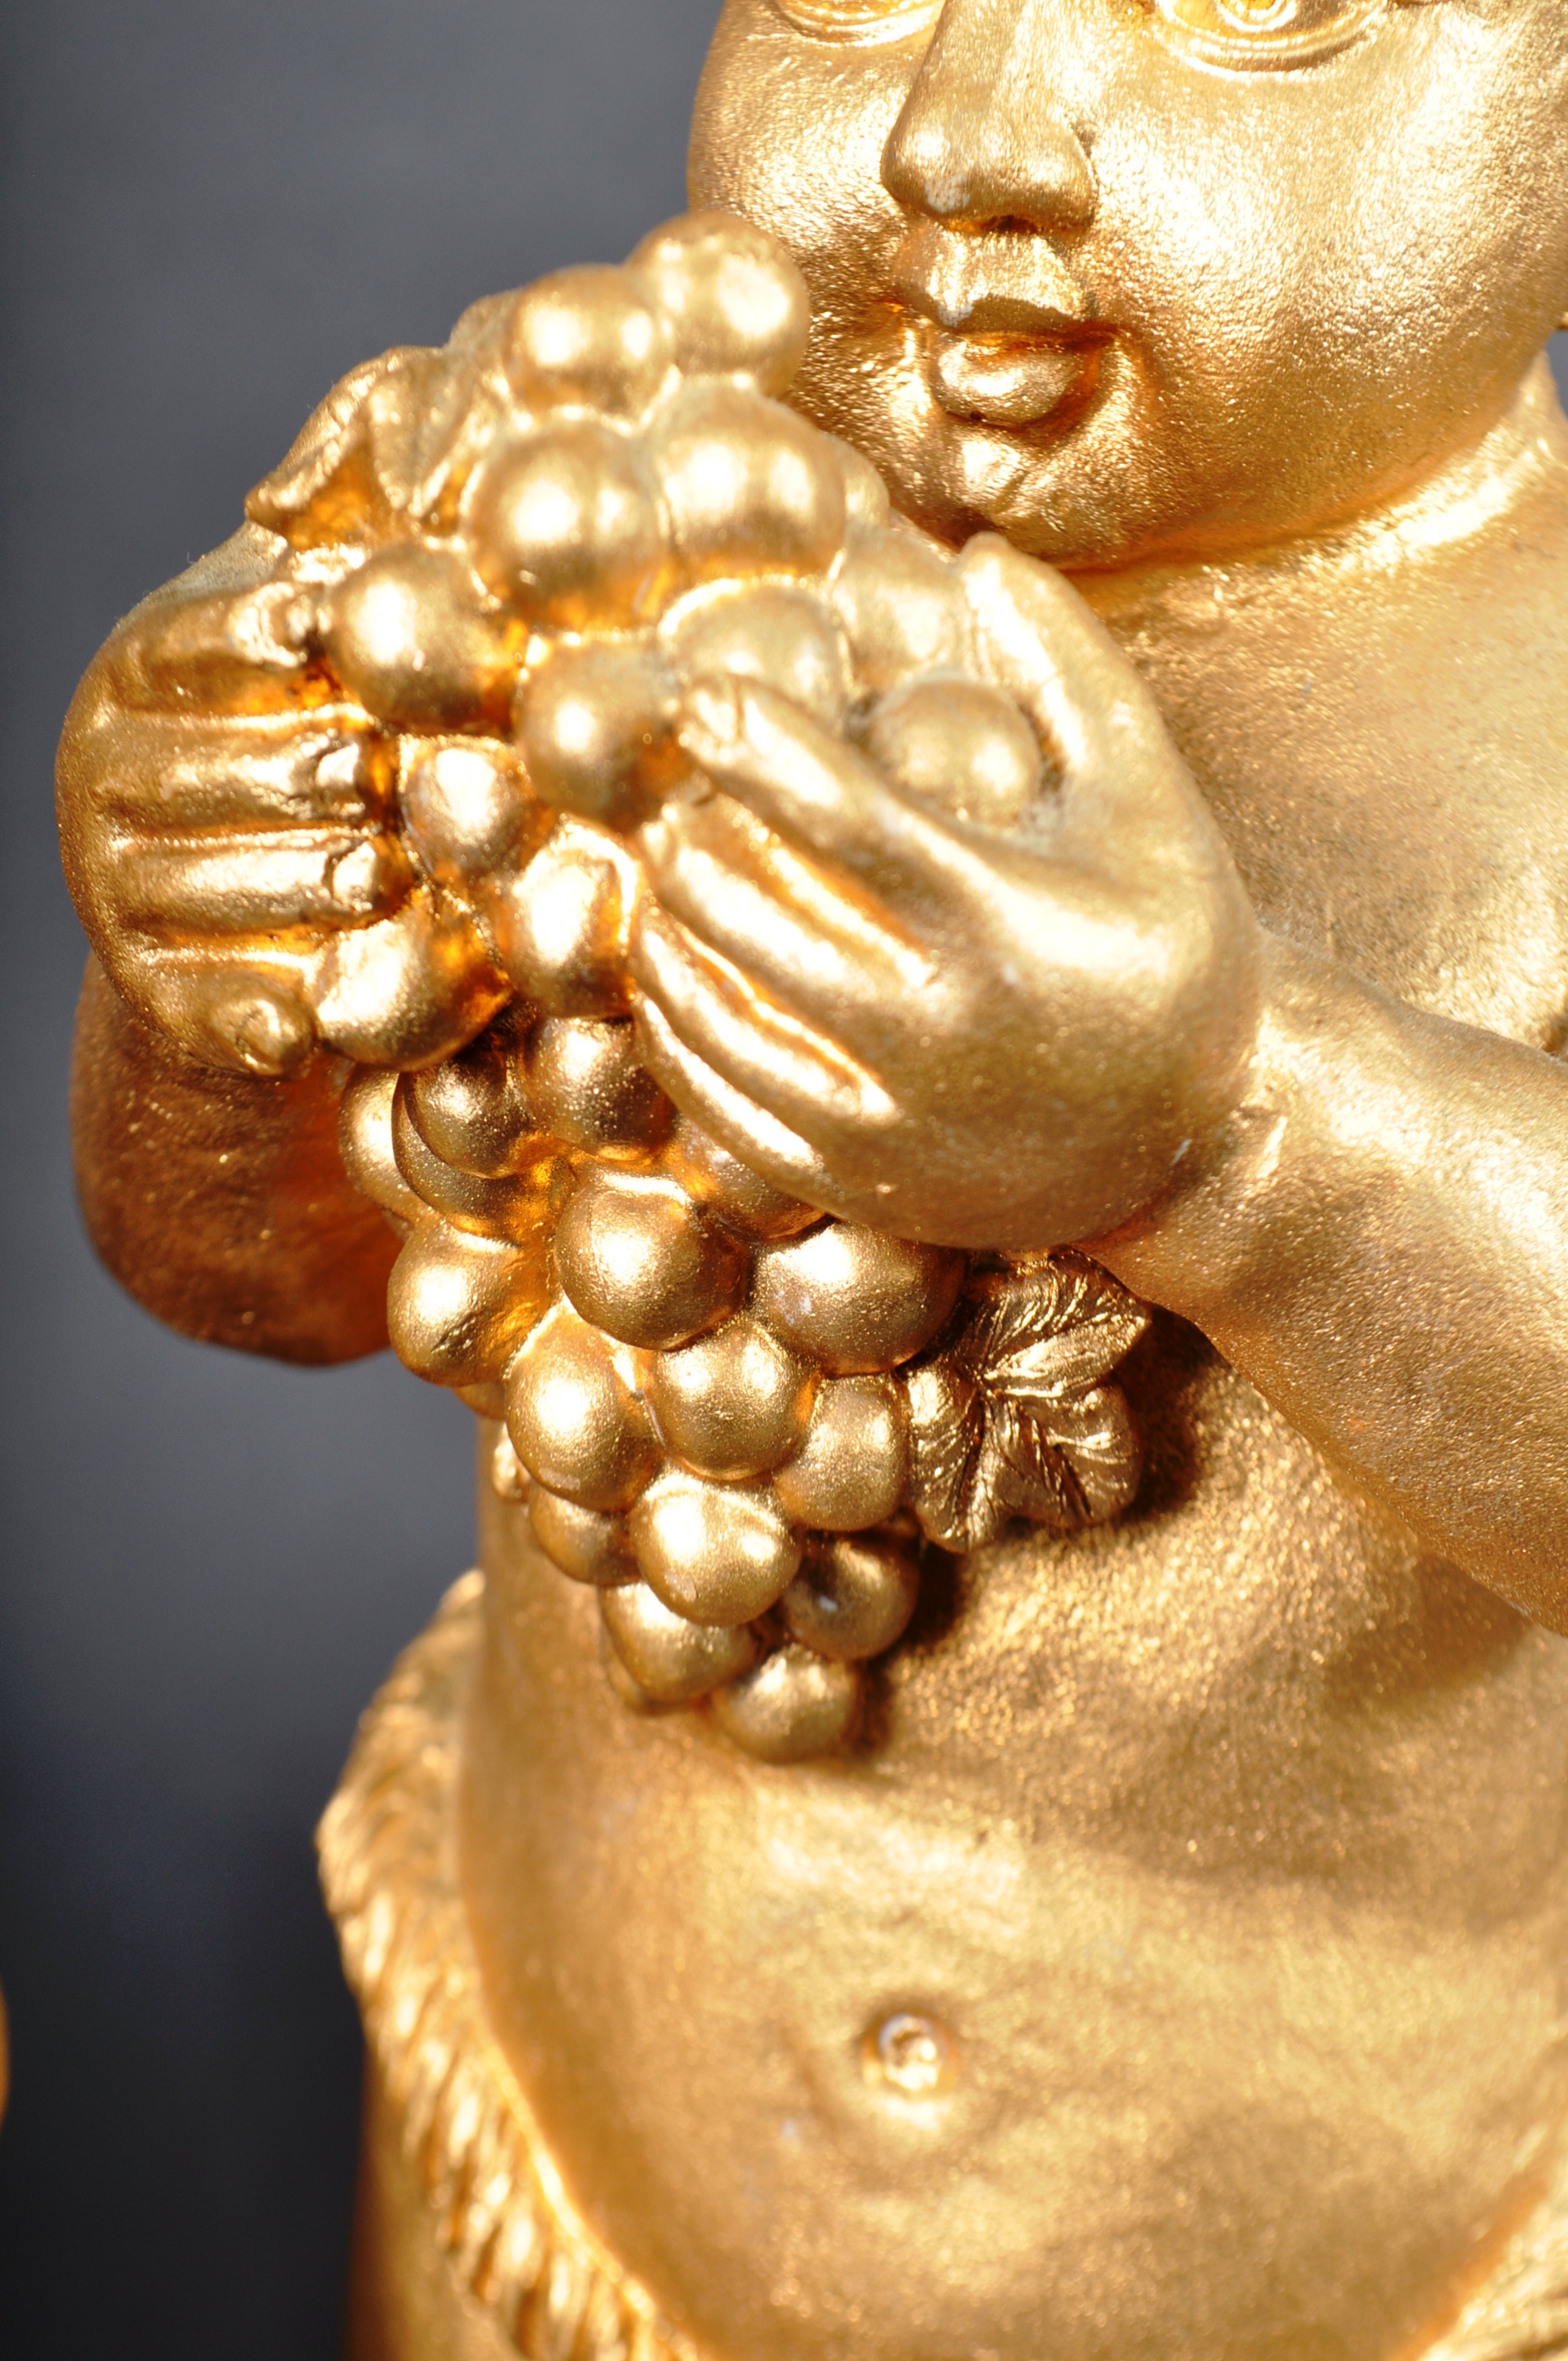 PAIR OF CONTEMPORARY GILT RESIN FIGURES MOULDED AS CHERUBS - Image 7 of 10